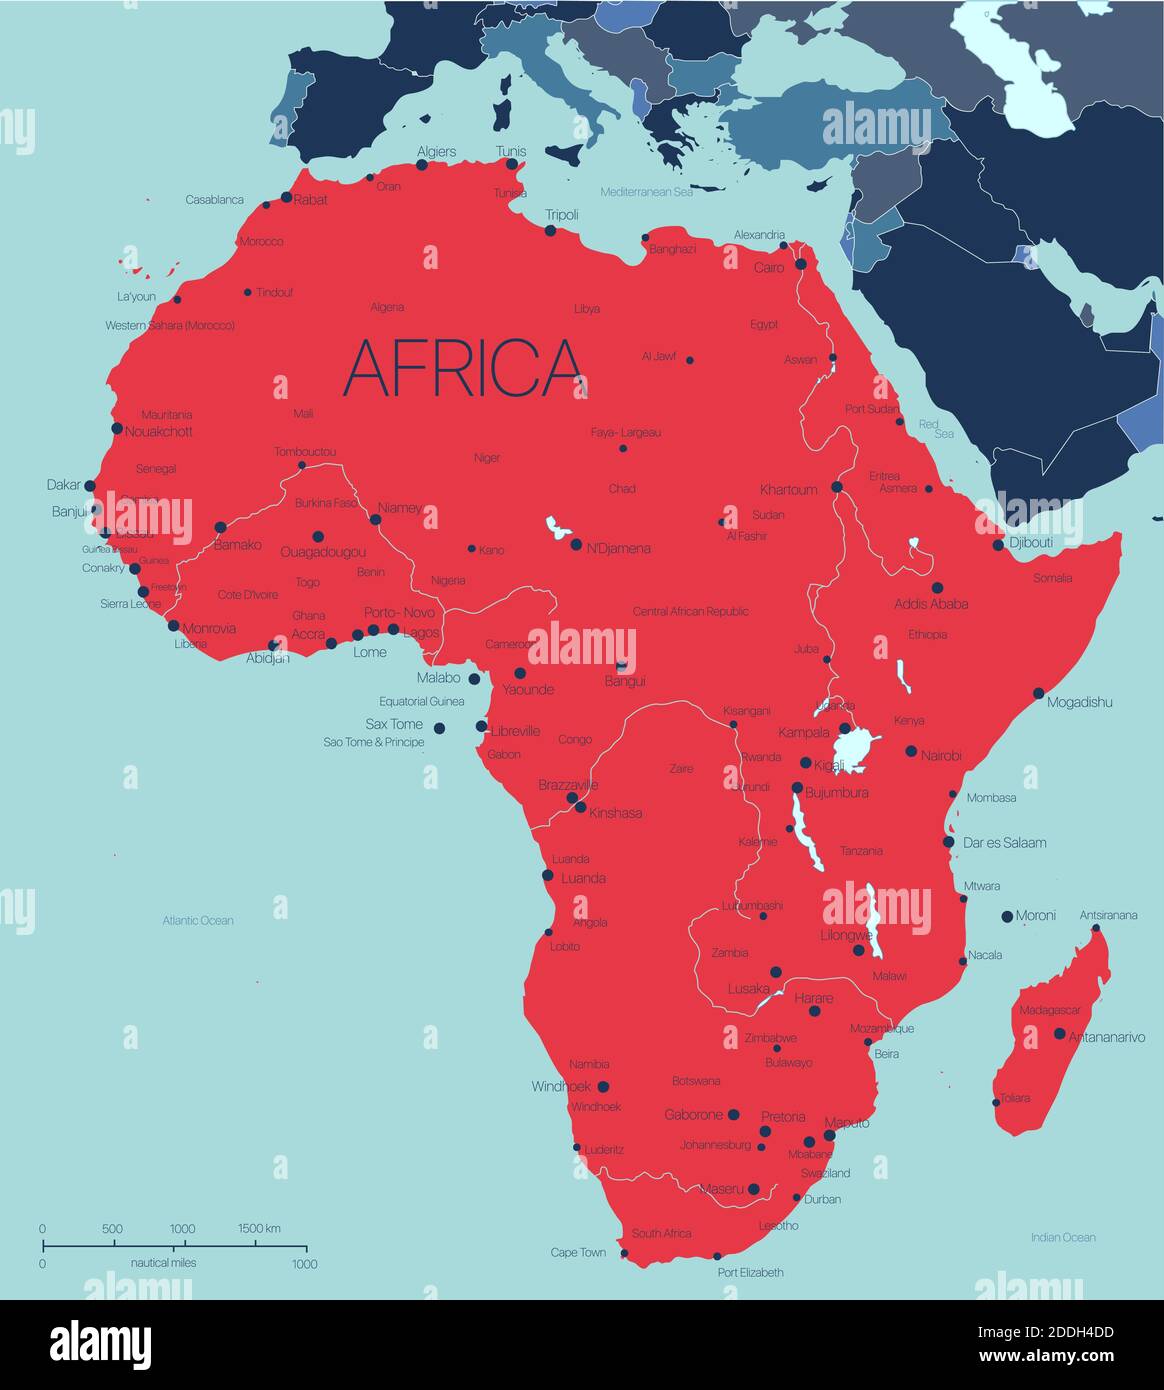 Africa Continent Vector Map With Countries And Cities Vector Editable